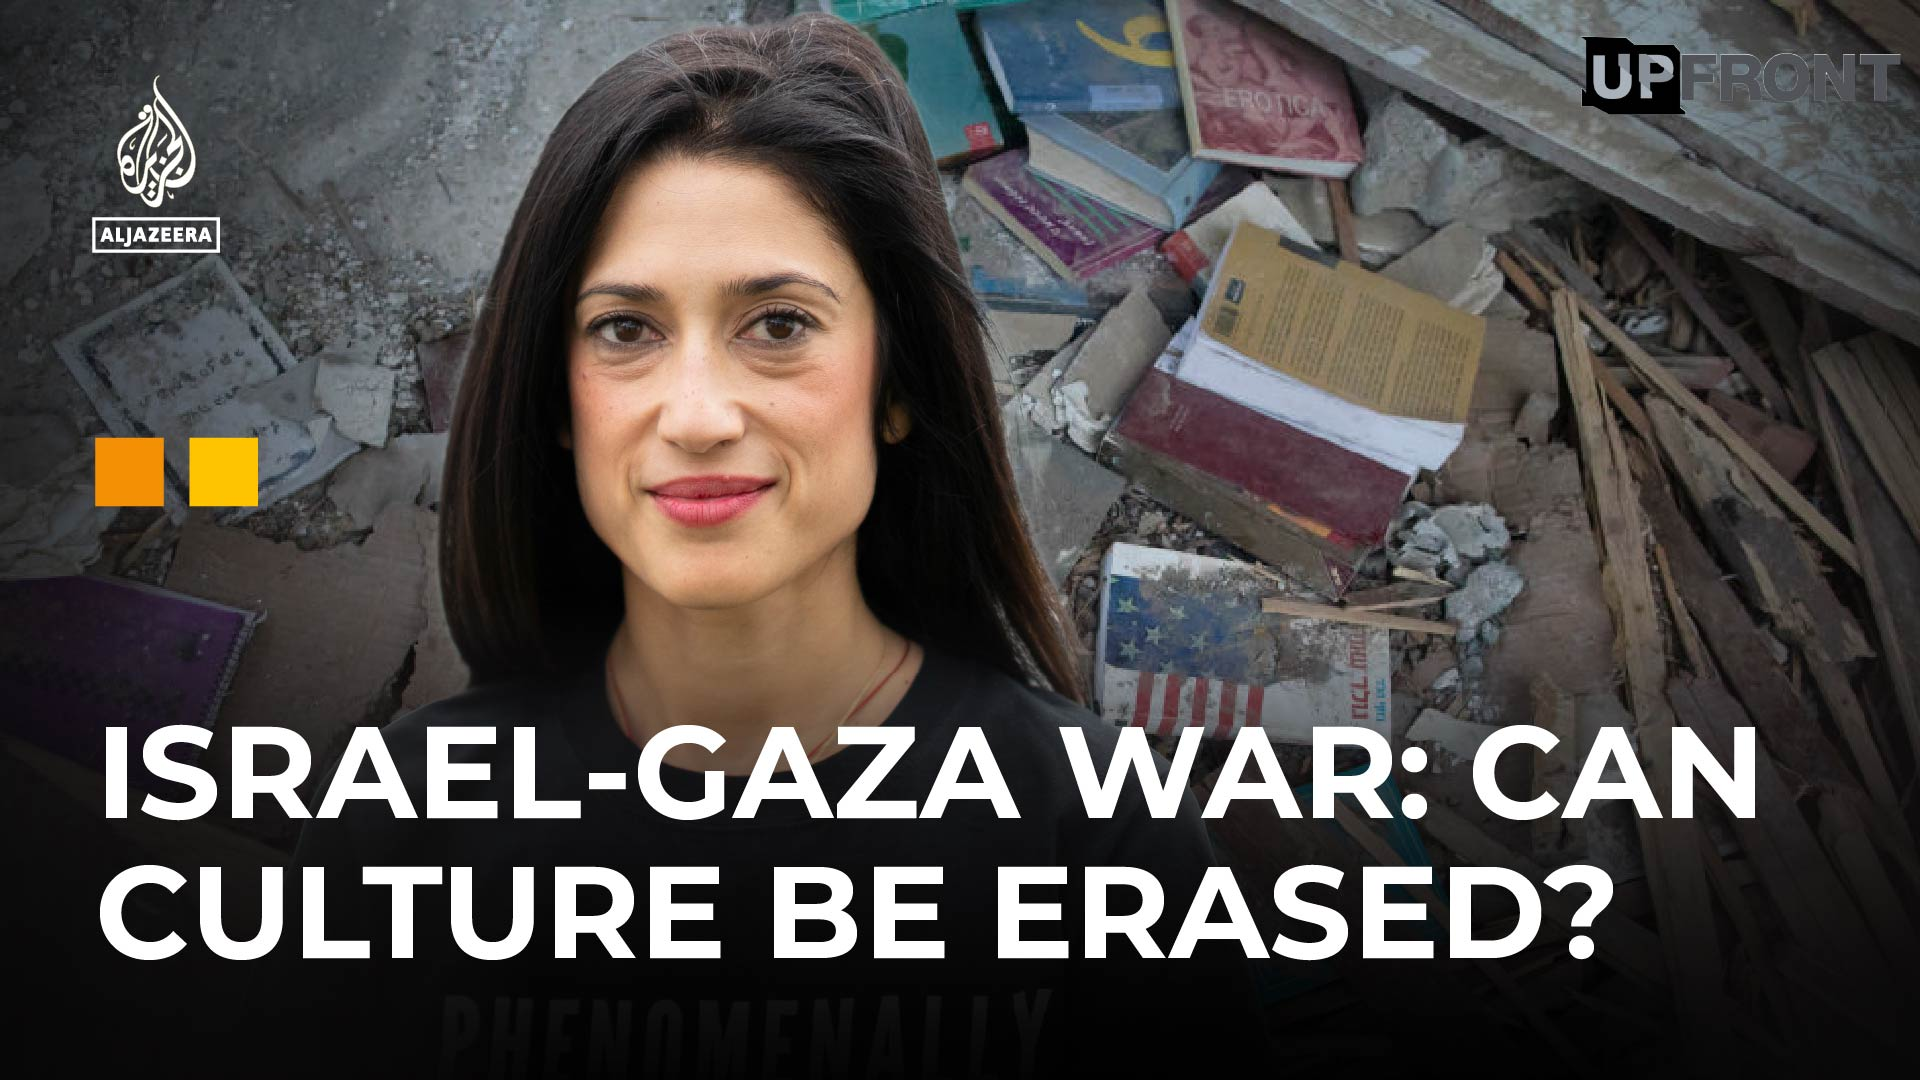 Israel-Gaza war: Why are culture and society targets? | UpFront